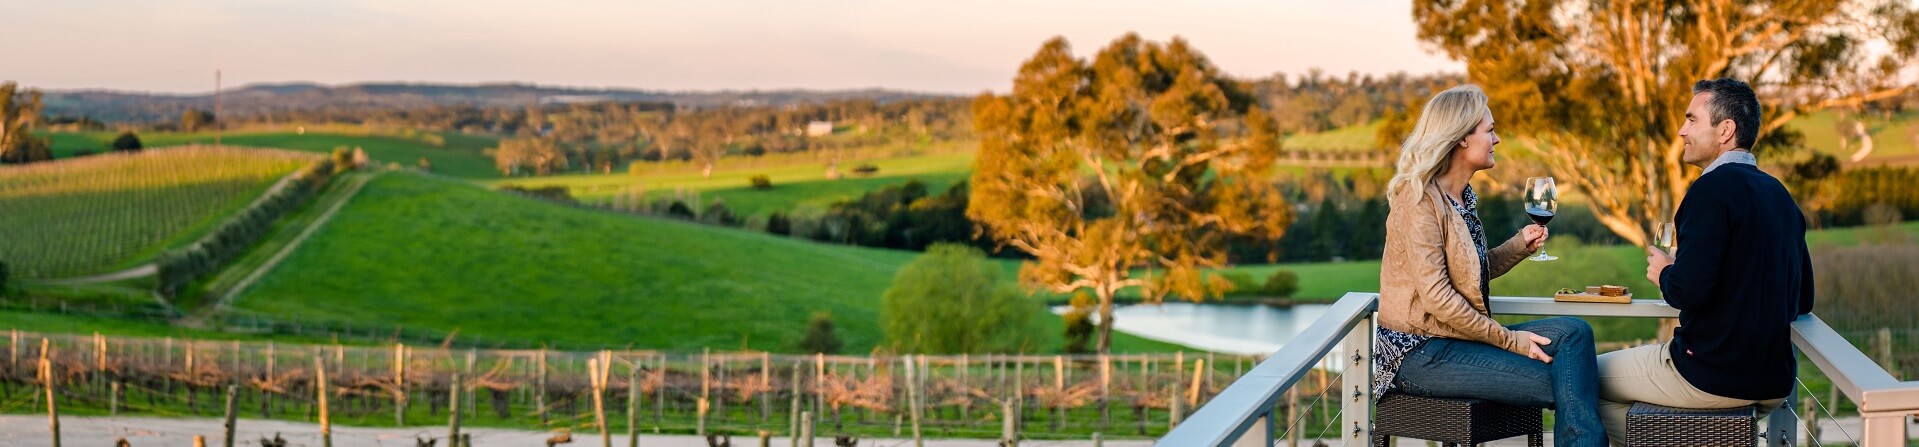 How do you get around the Barossa wineries?